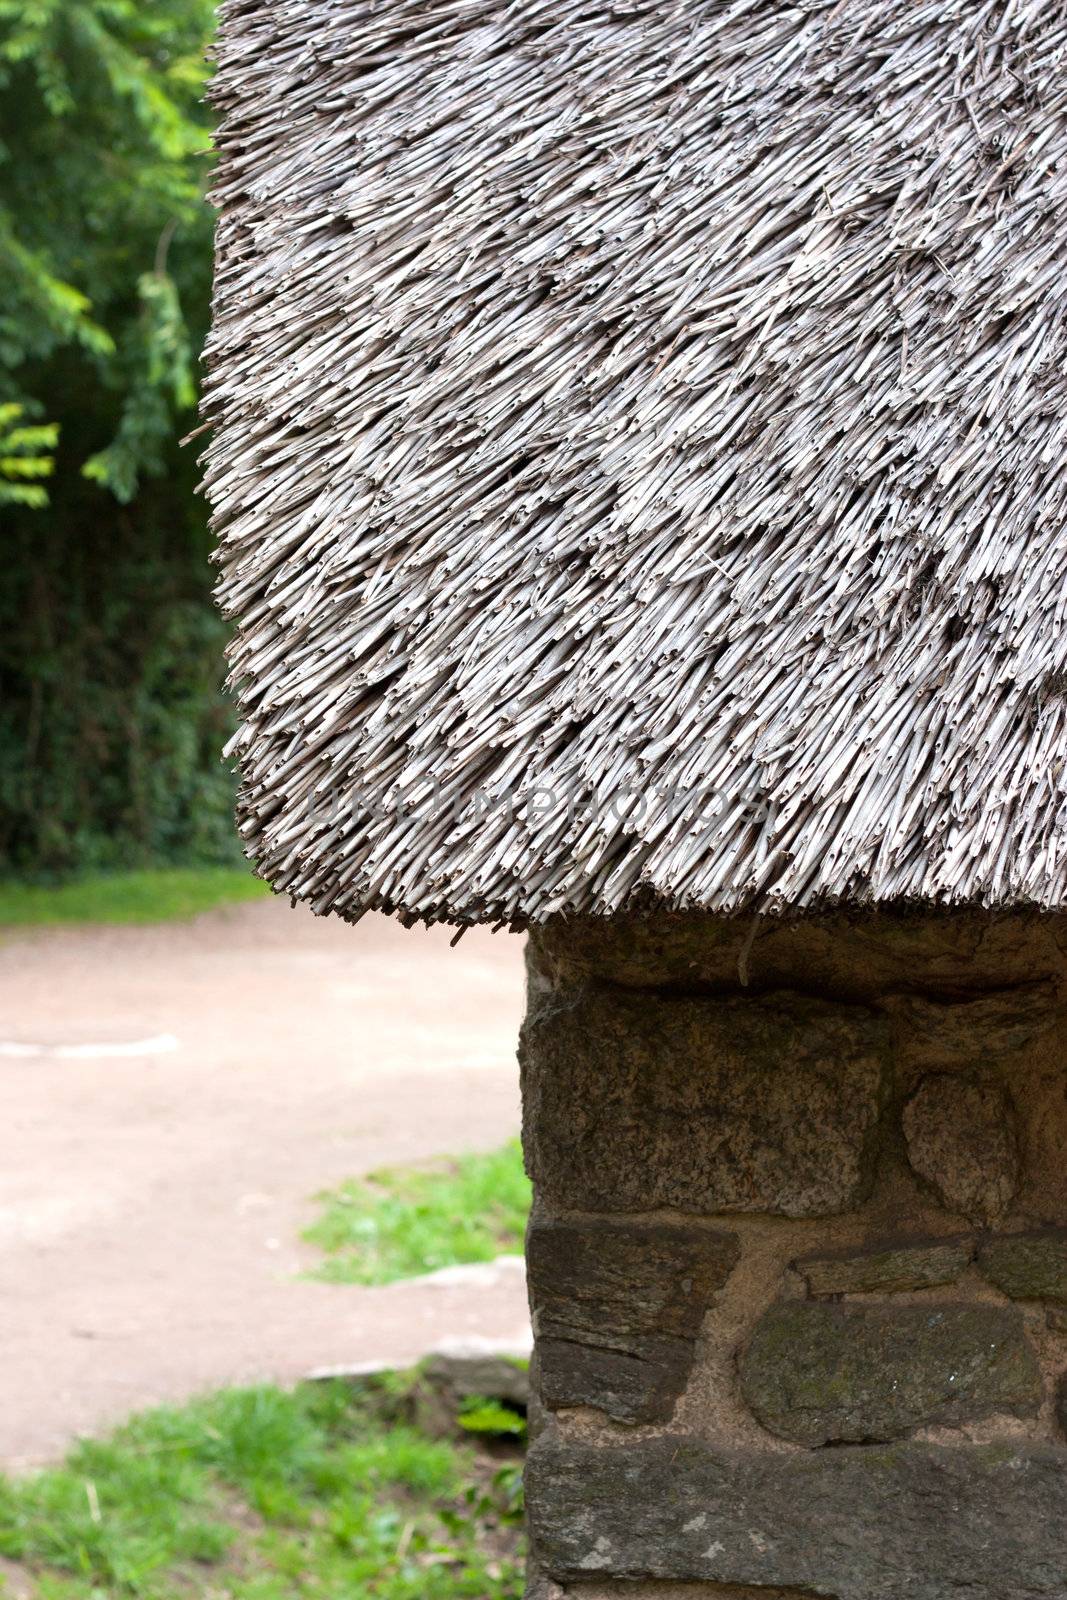 Details of a thatched cottage in Brittany (France)